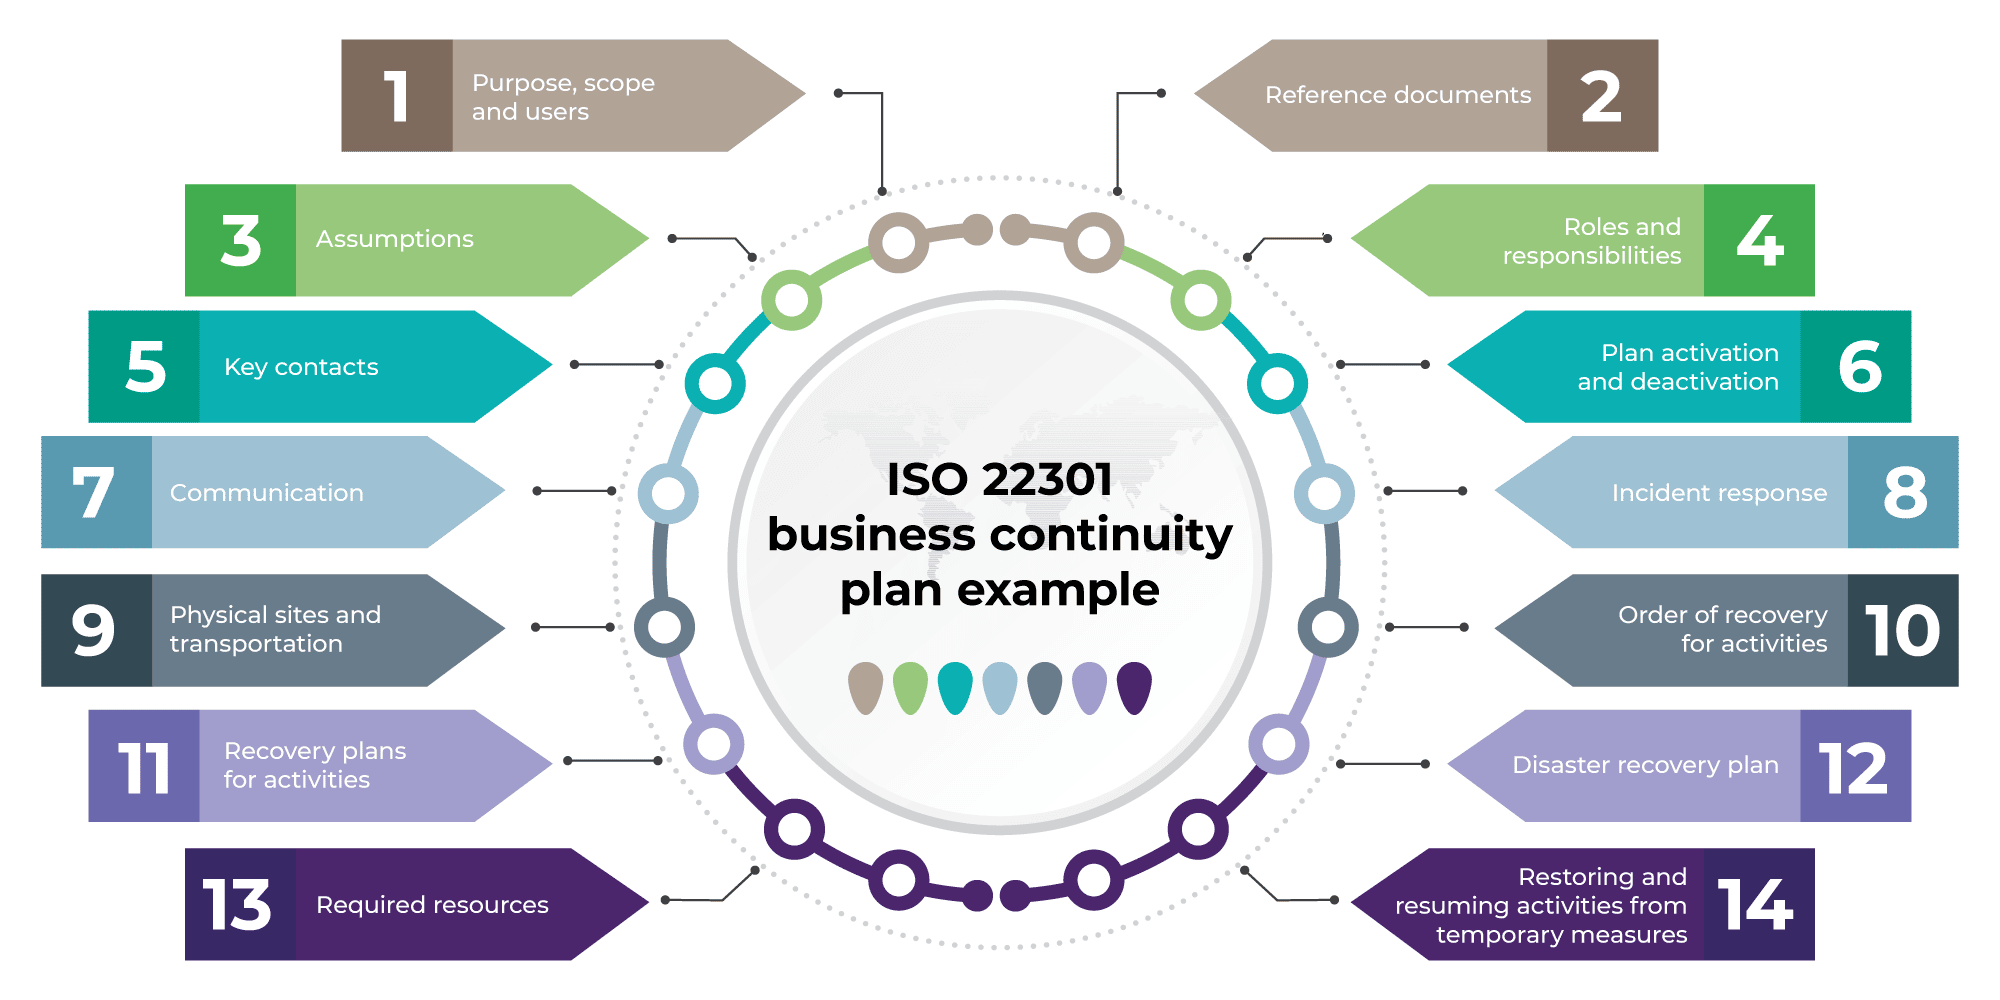 Business Continuity Plan (BCP) Structure According to ISO 22301